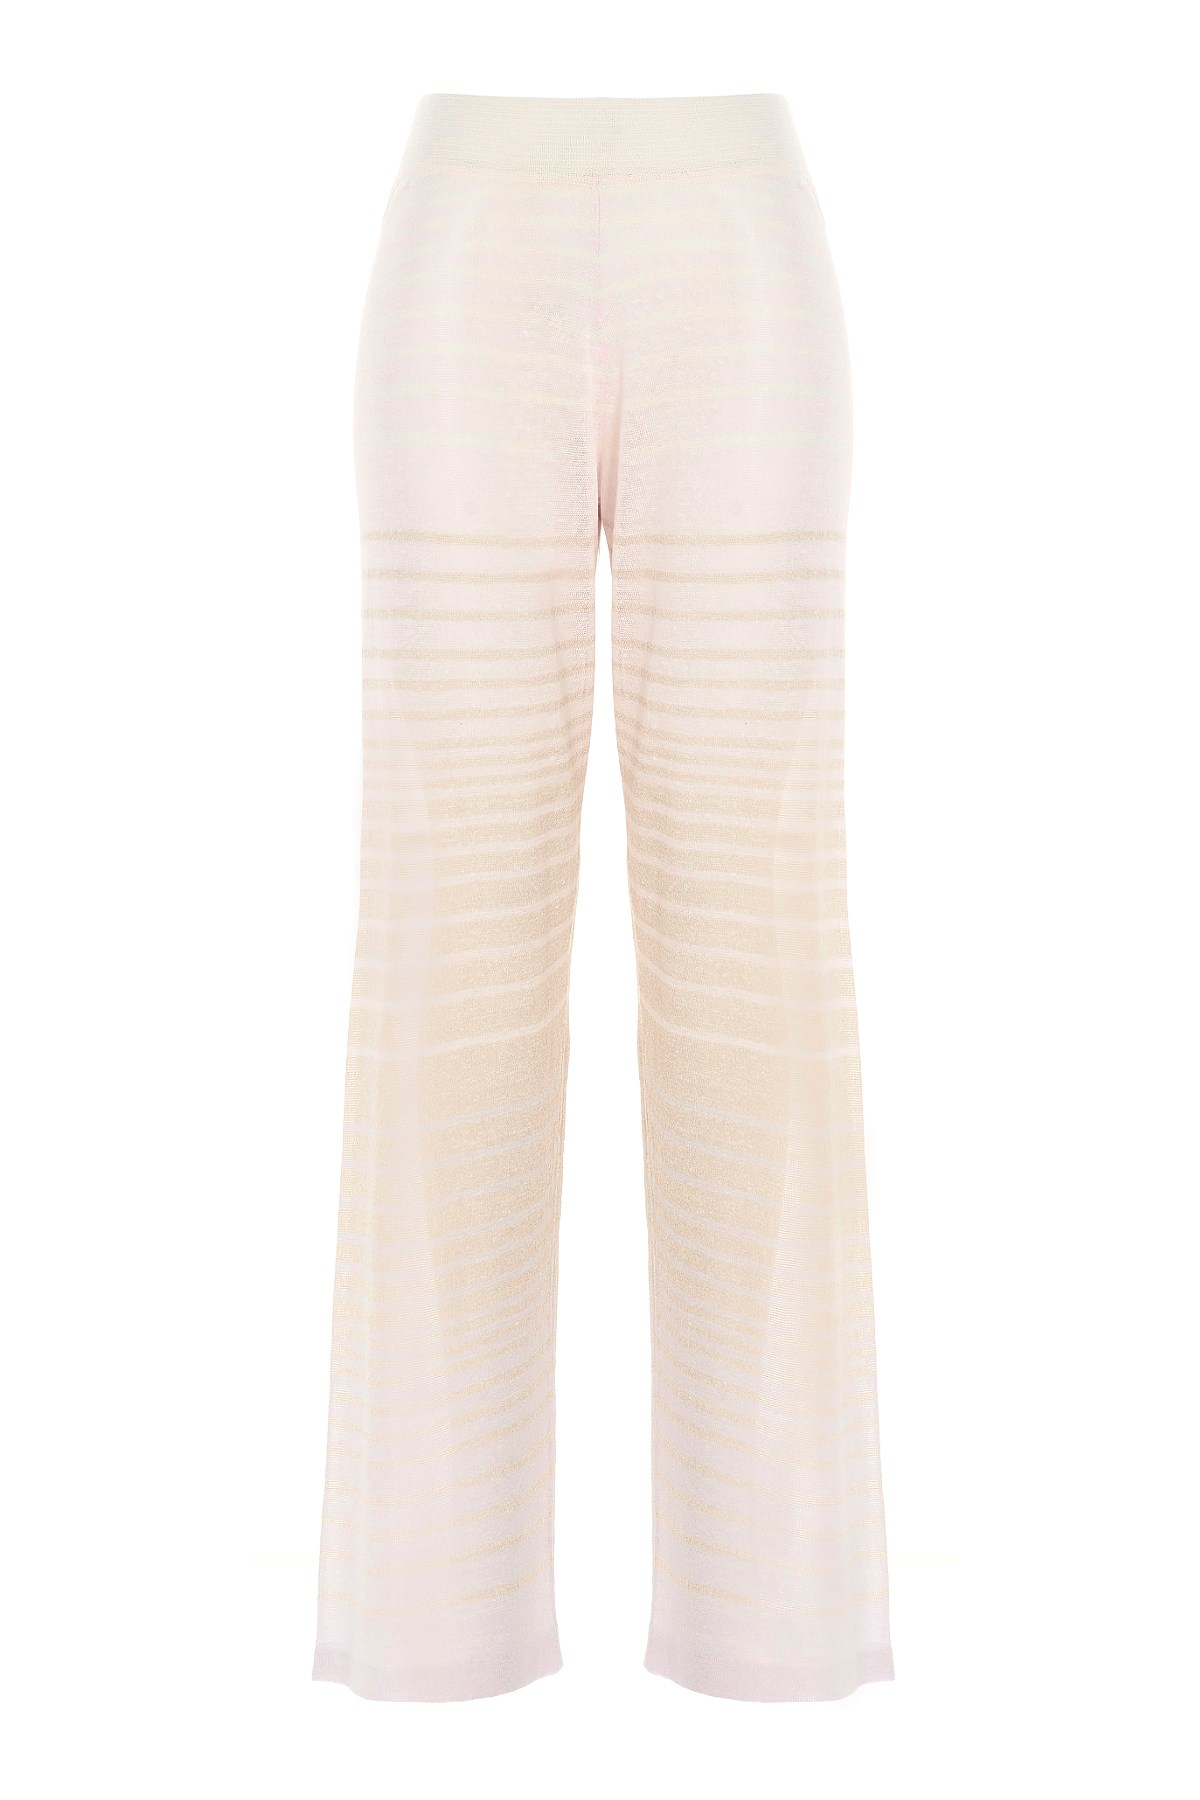 CANESSA Striped Linen Trousers